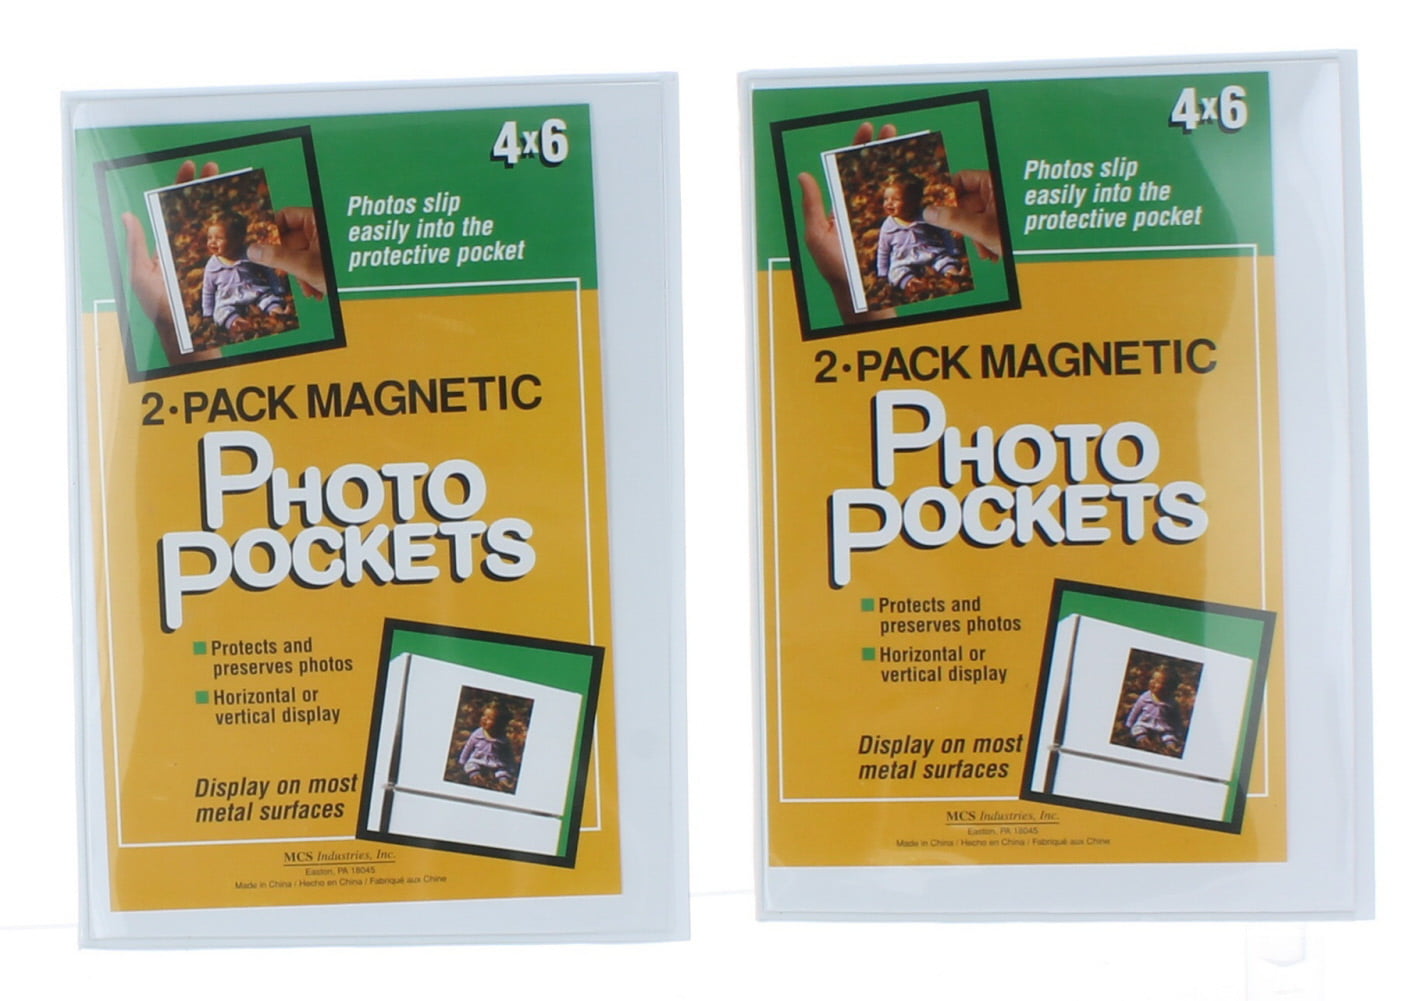 PICTURE HOLDERS REFRIGERATOR PARTY 5 PACKS Details about   10 MAGNETIC 4" x 6" PHOTO SLEEVES- 